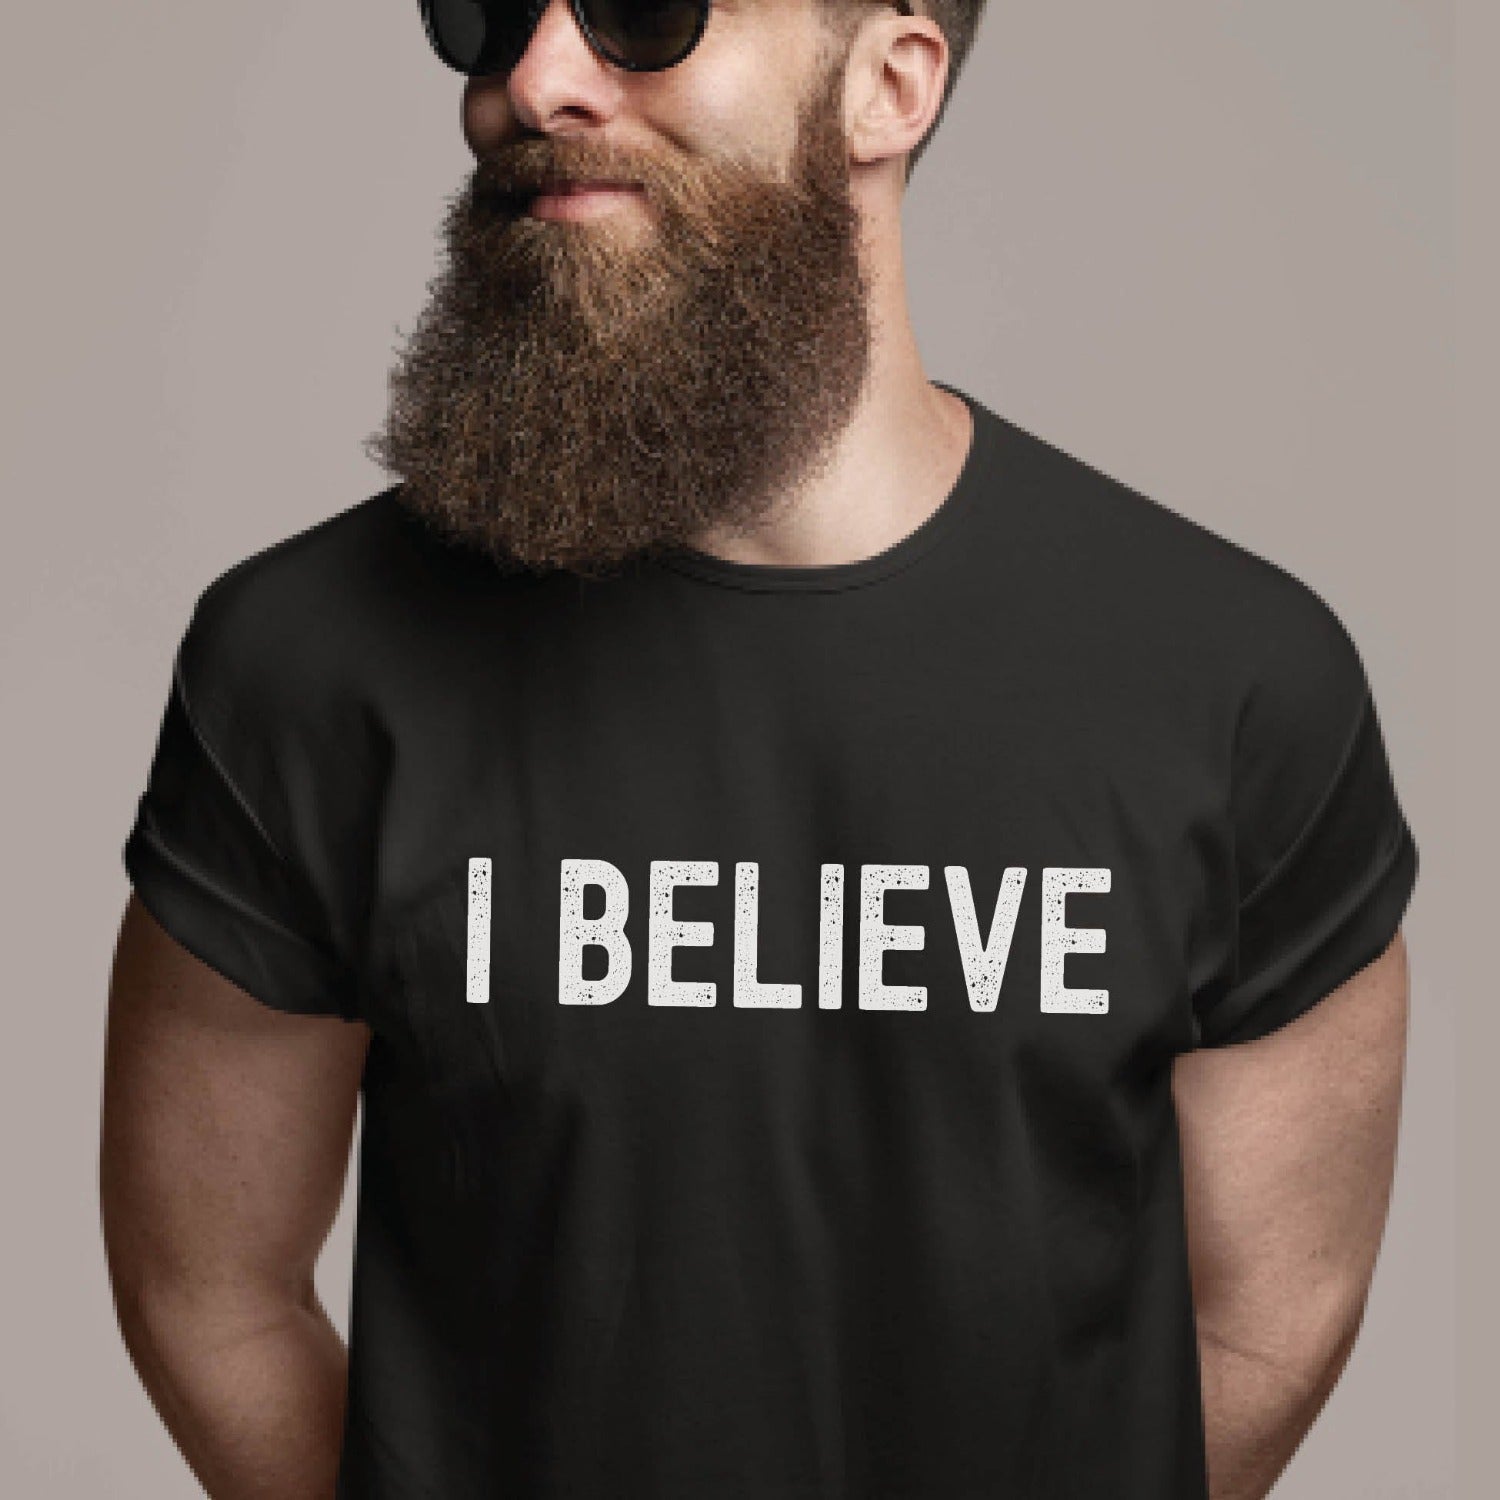 Trendy bearded man with sunglasses wearing an I BELIEVE Christian aesthetic faith-based bold statement distressed typography t-shirt design printed in white on soft black unisex fit t-shirt, designed for men & women believers